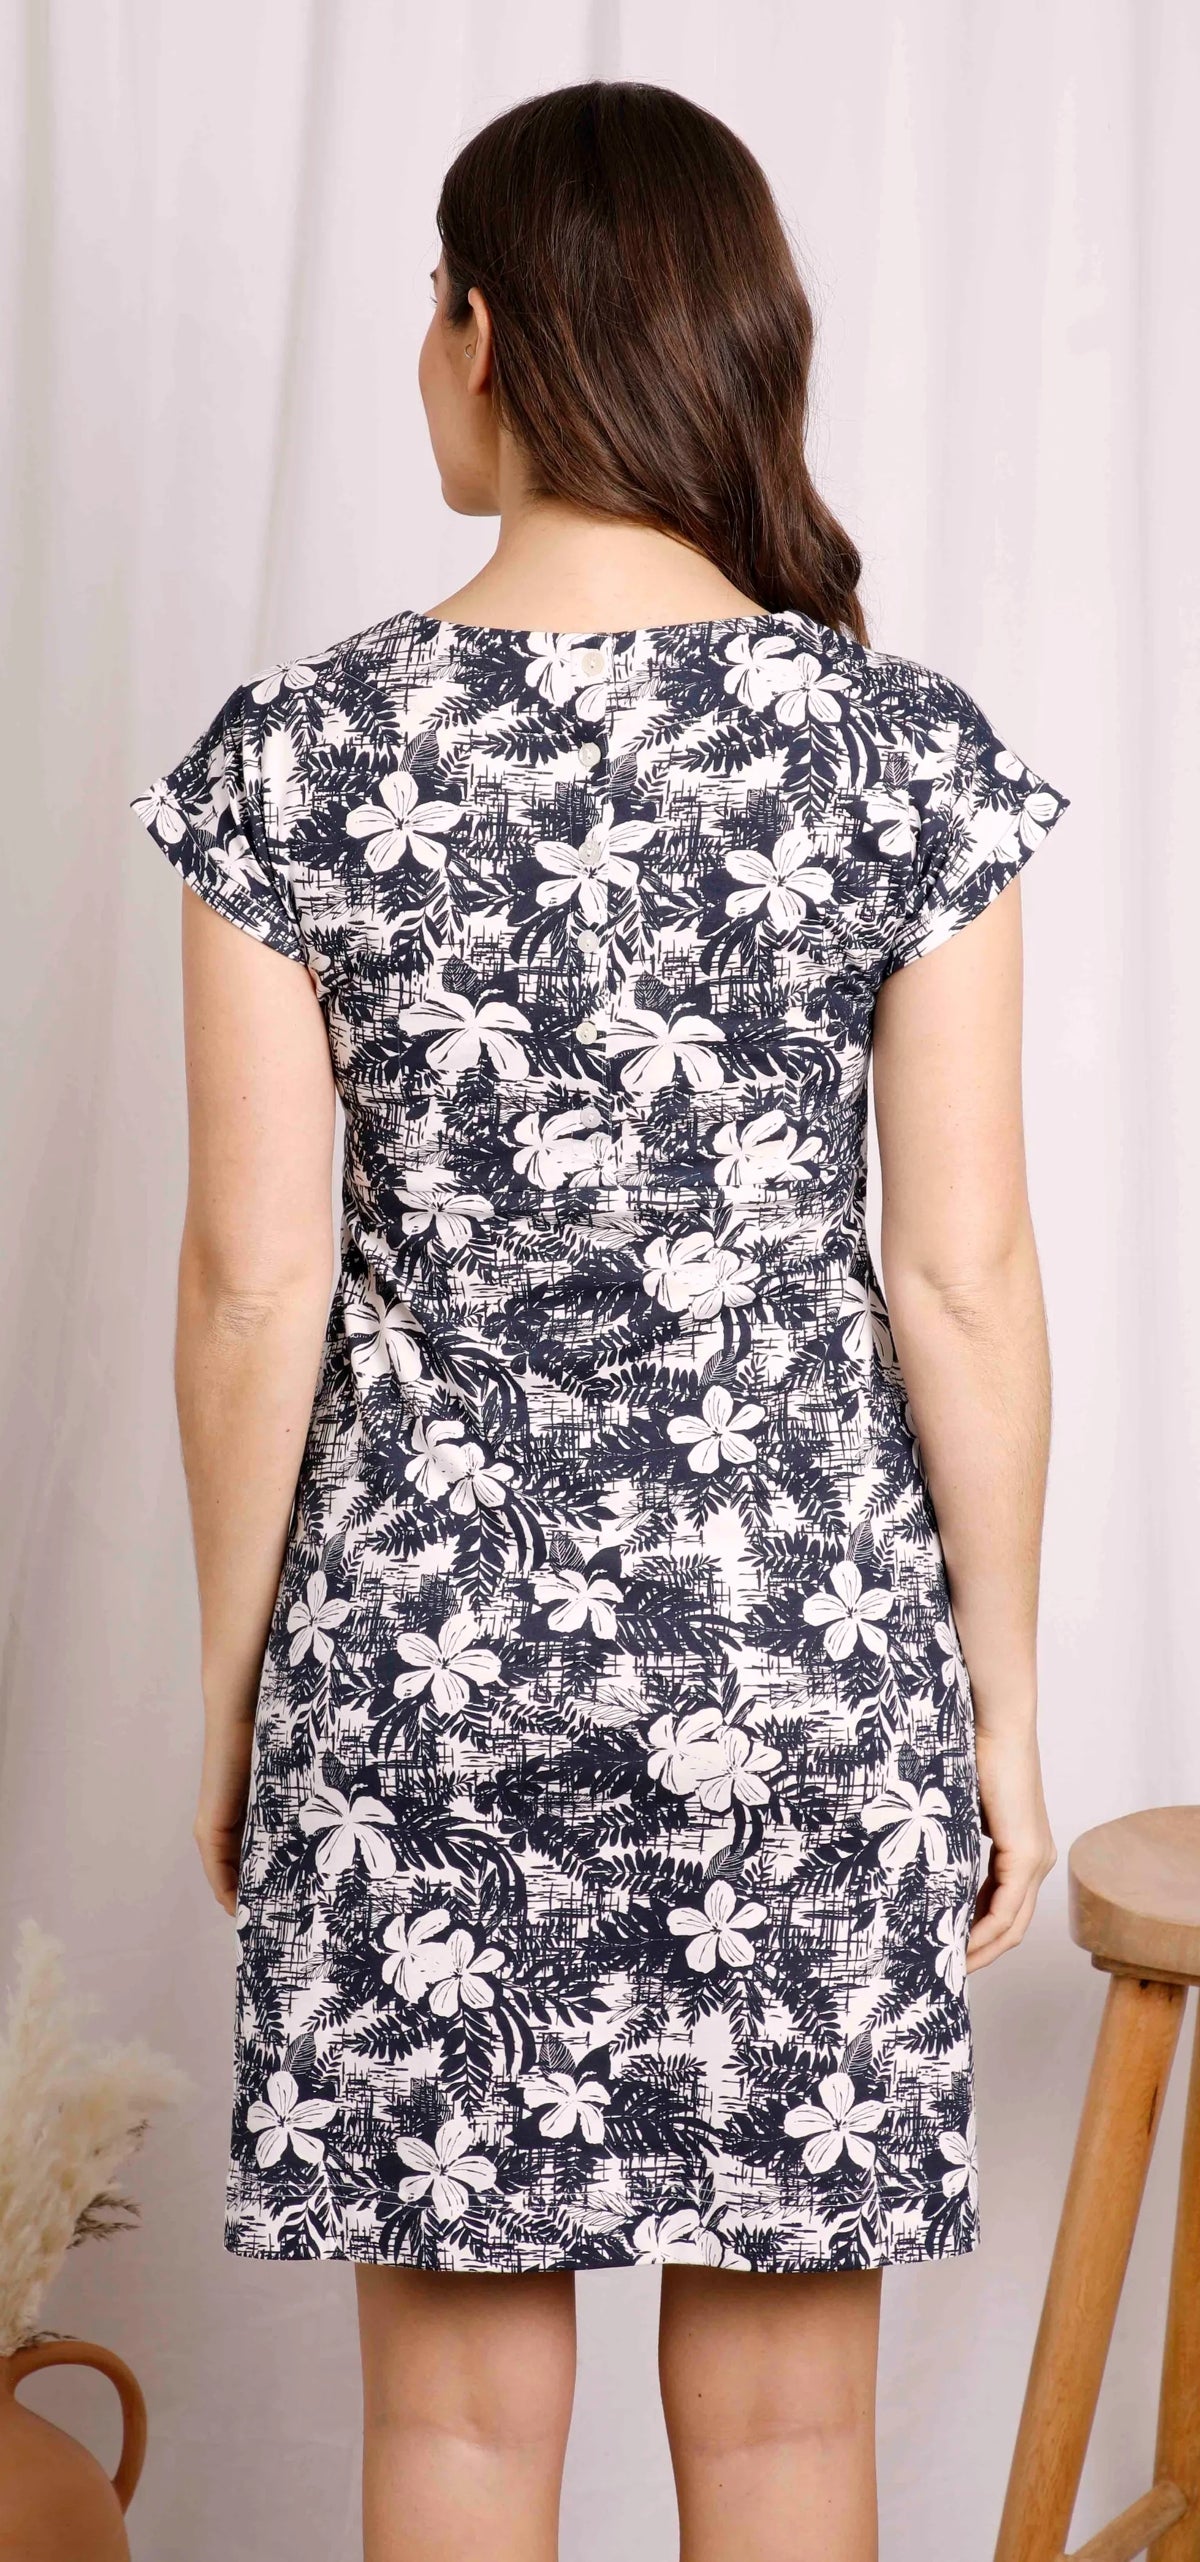 Women's Tallahassee short sleeve jersey dress from Weird Fish in Dark Denim Blue with a White floral pattern.